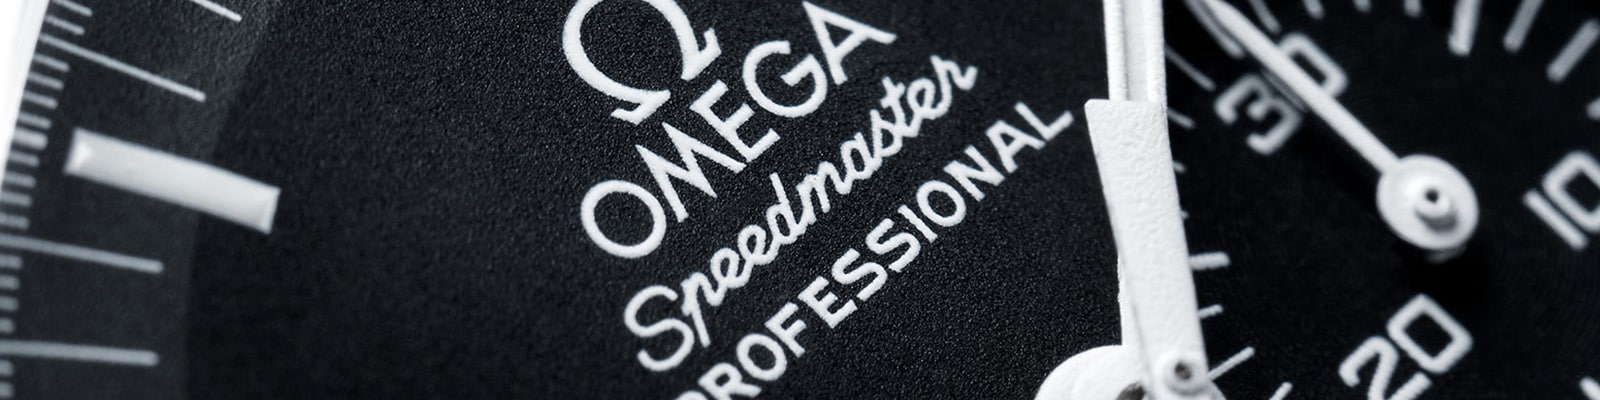 omega official site